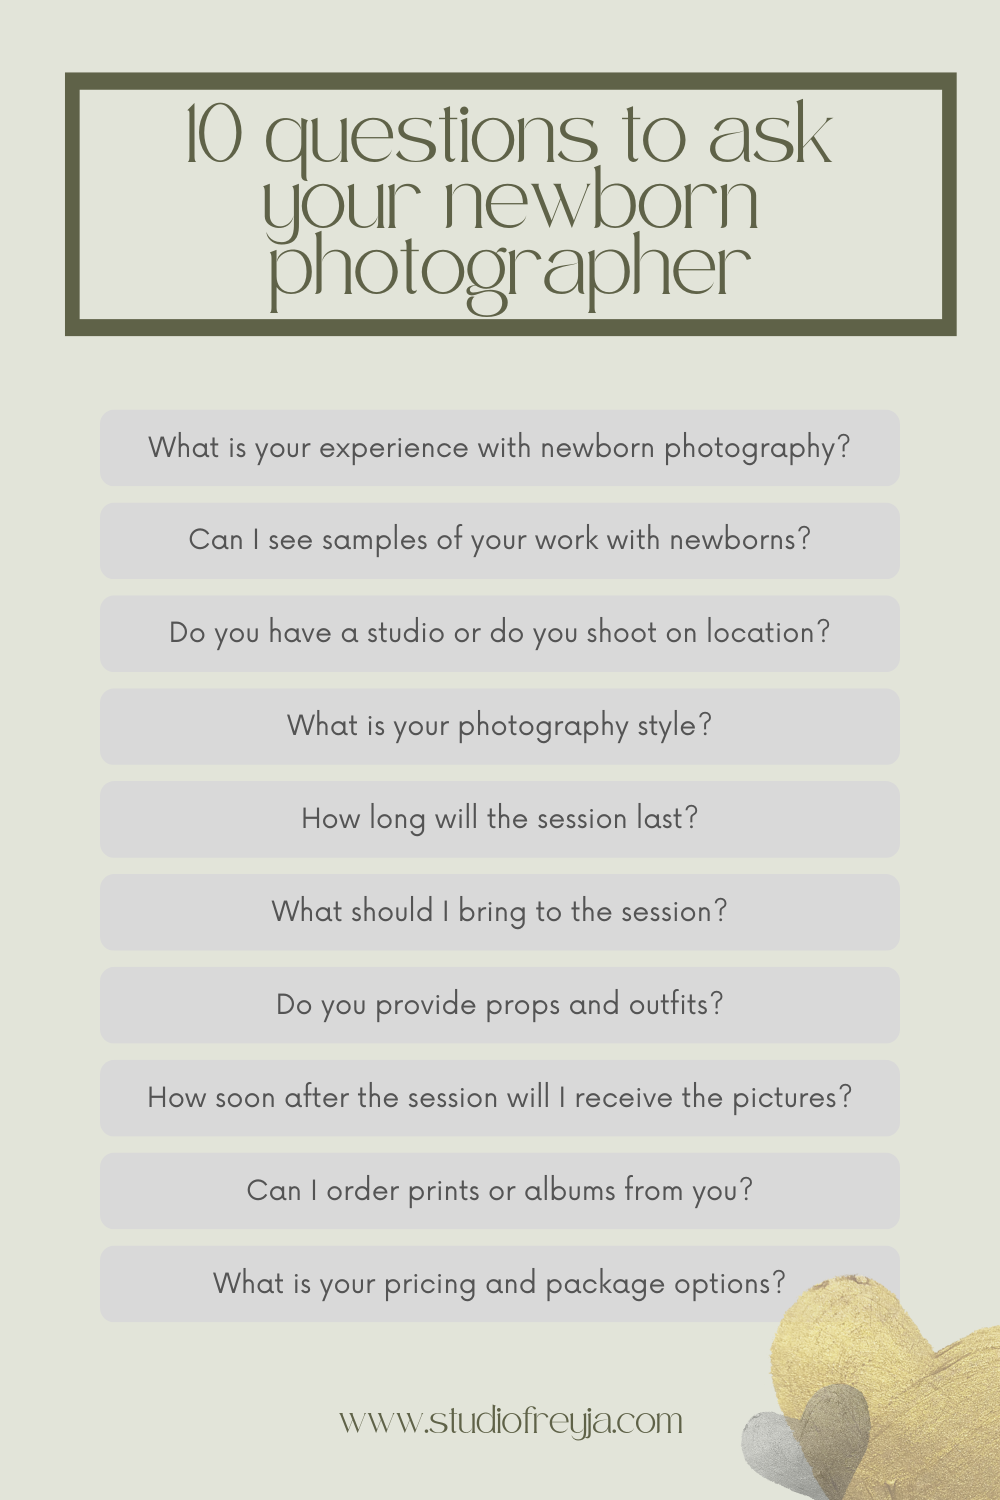 10 Questions to ask your newborn photographer